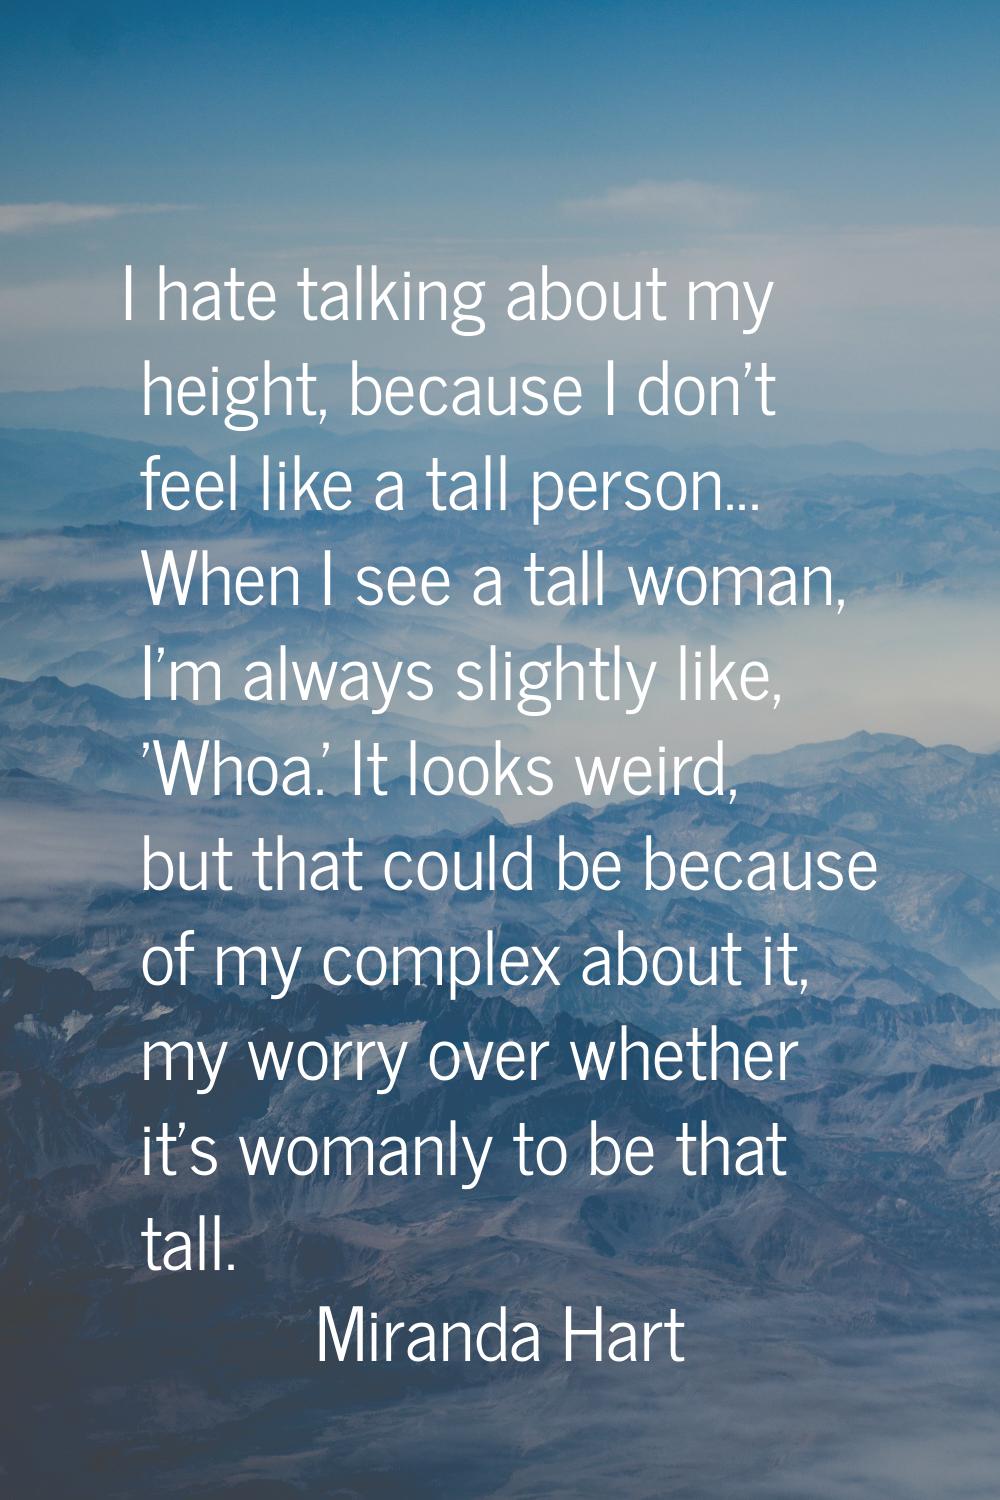 I hate talking about my height, because I don't feel like a tall person... When I see a tall woman,